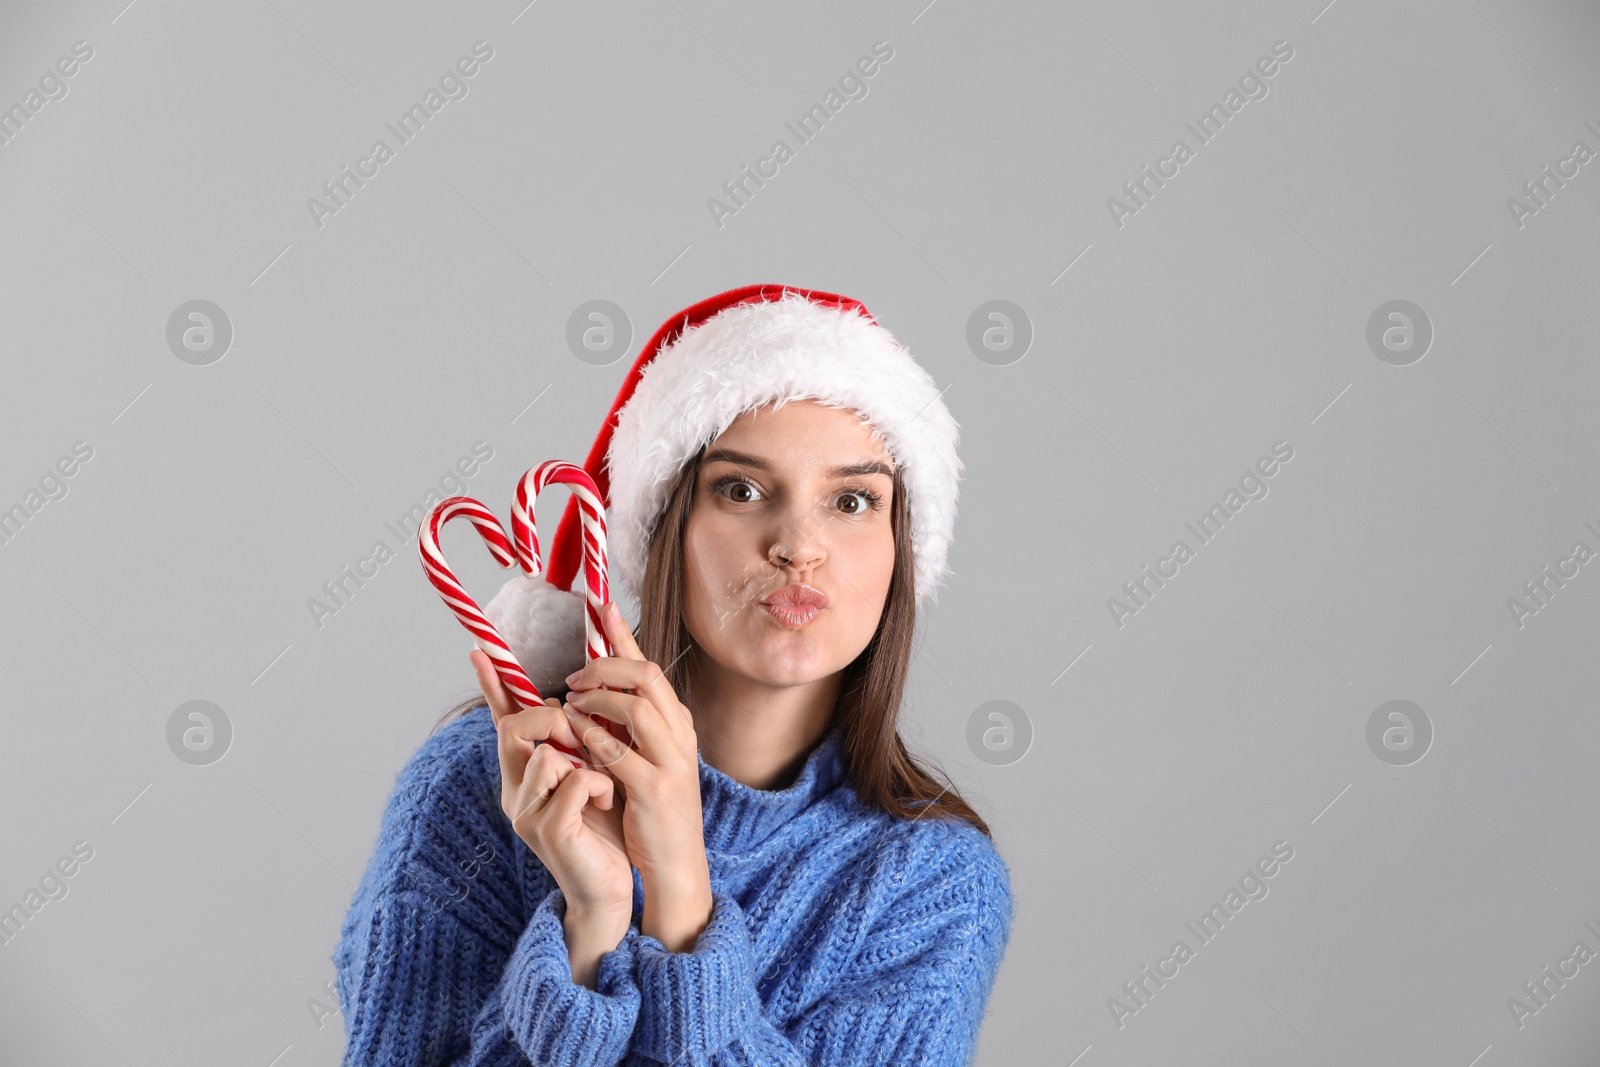 Photo of Pretty woman in Santa hat and sweater making heart with candy canes on grey background